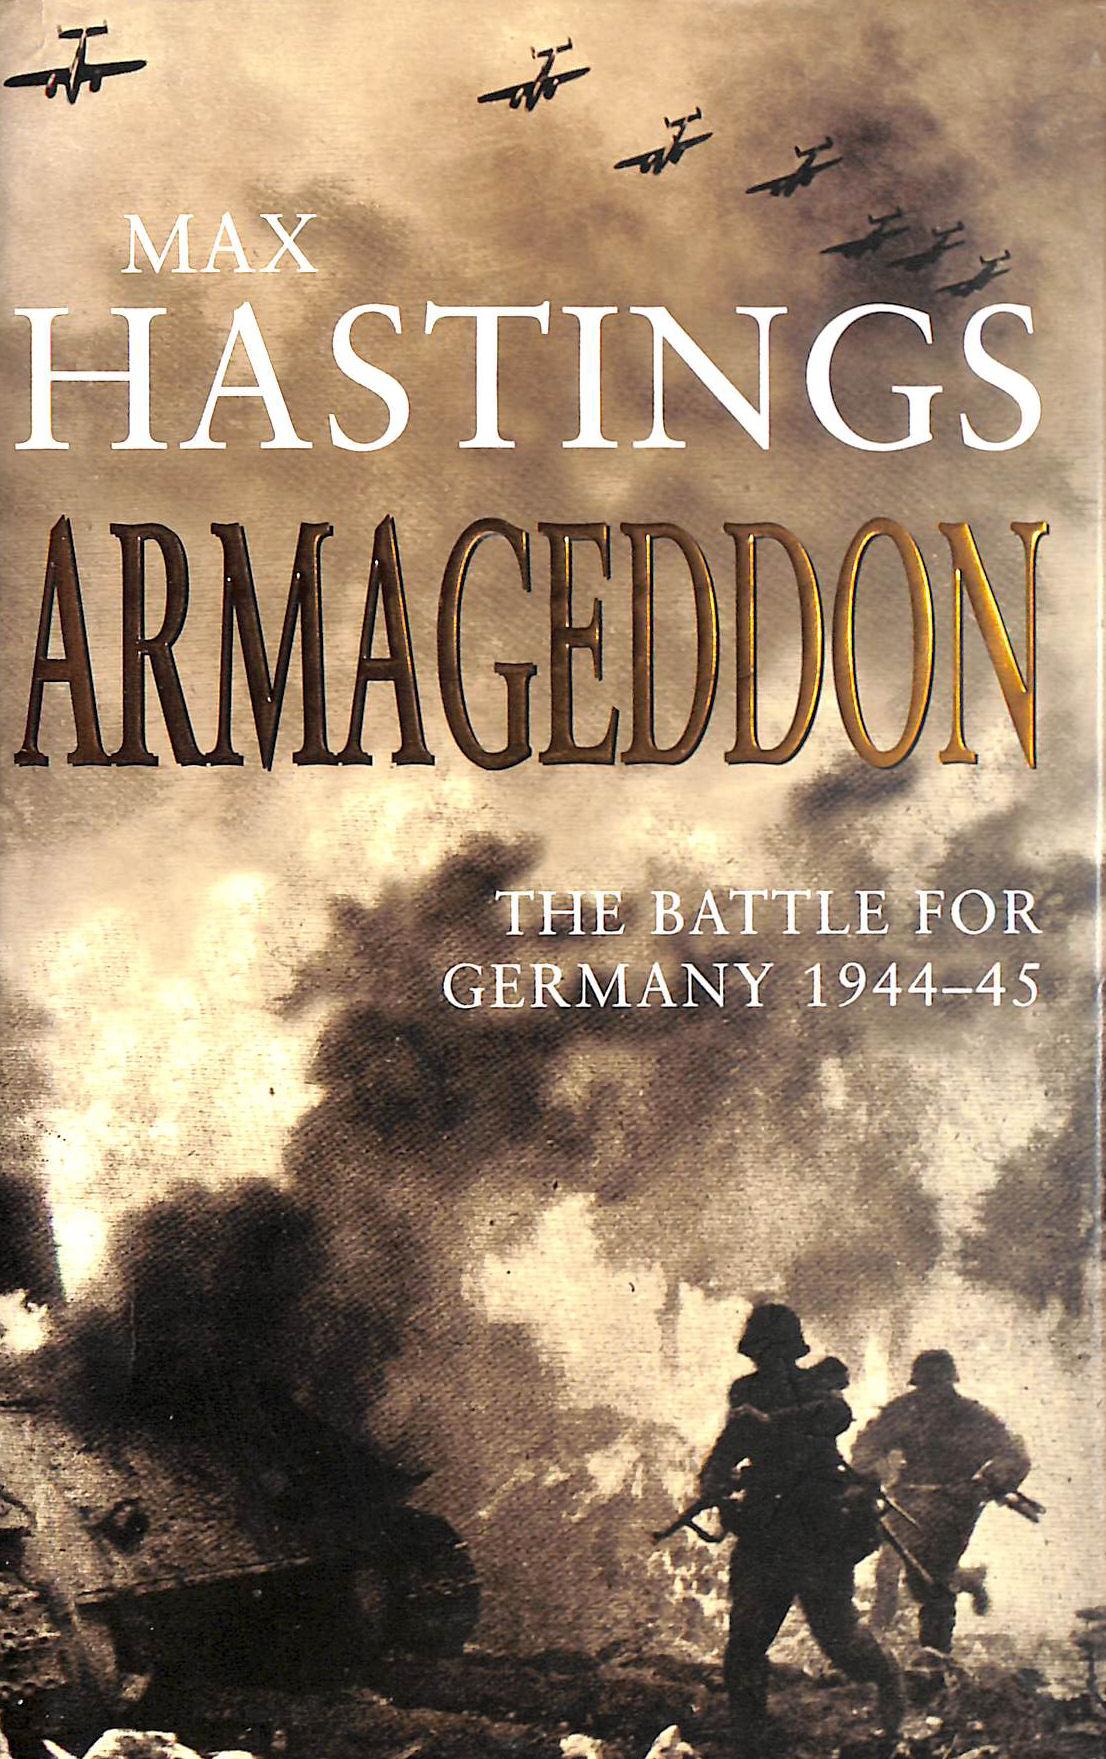 HASTINGS, MAX - Armageddon: The Battle for Germany 1944-45